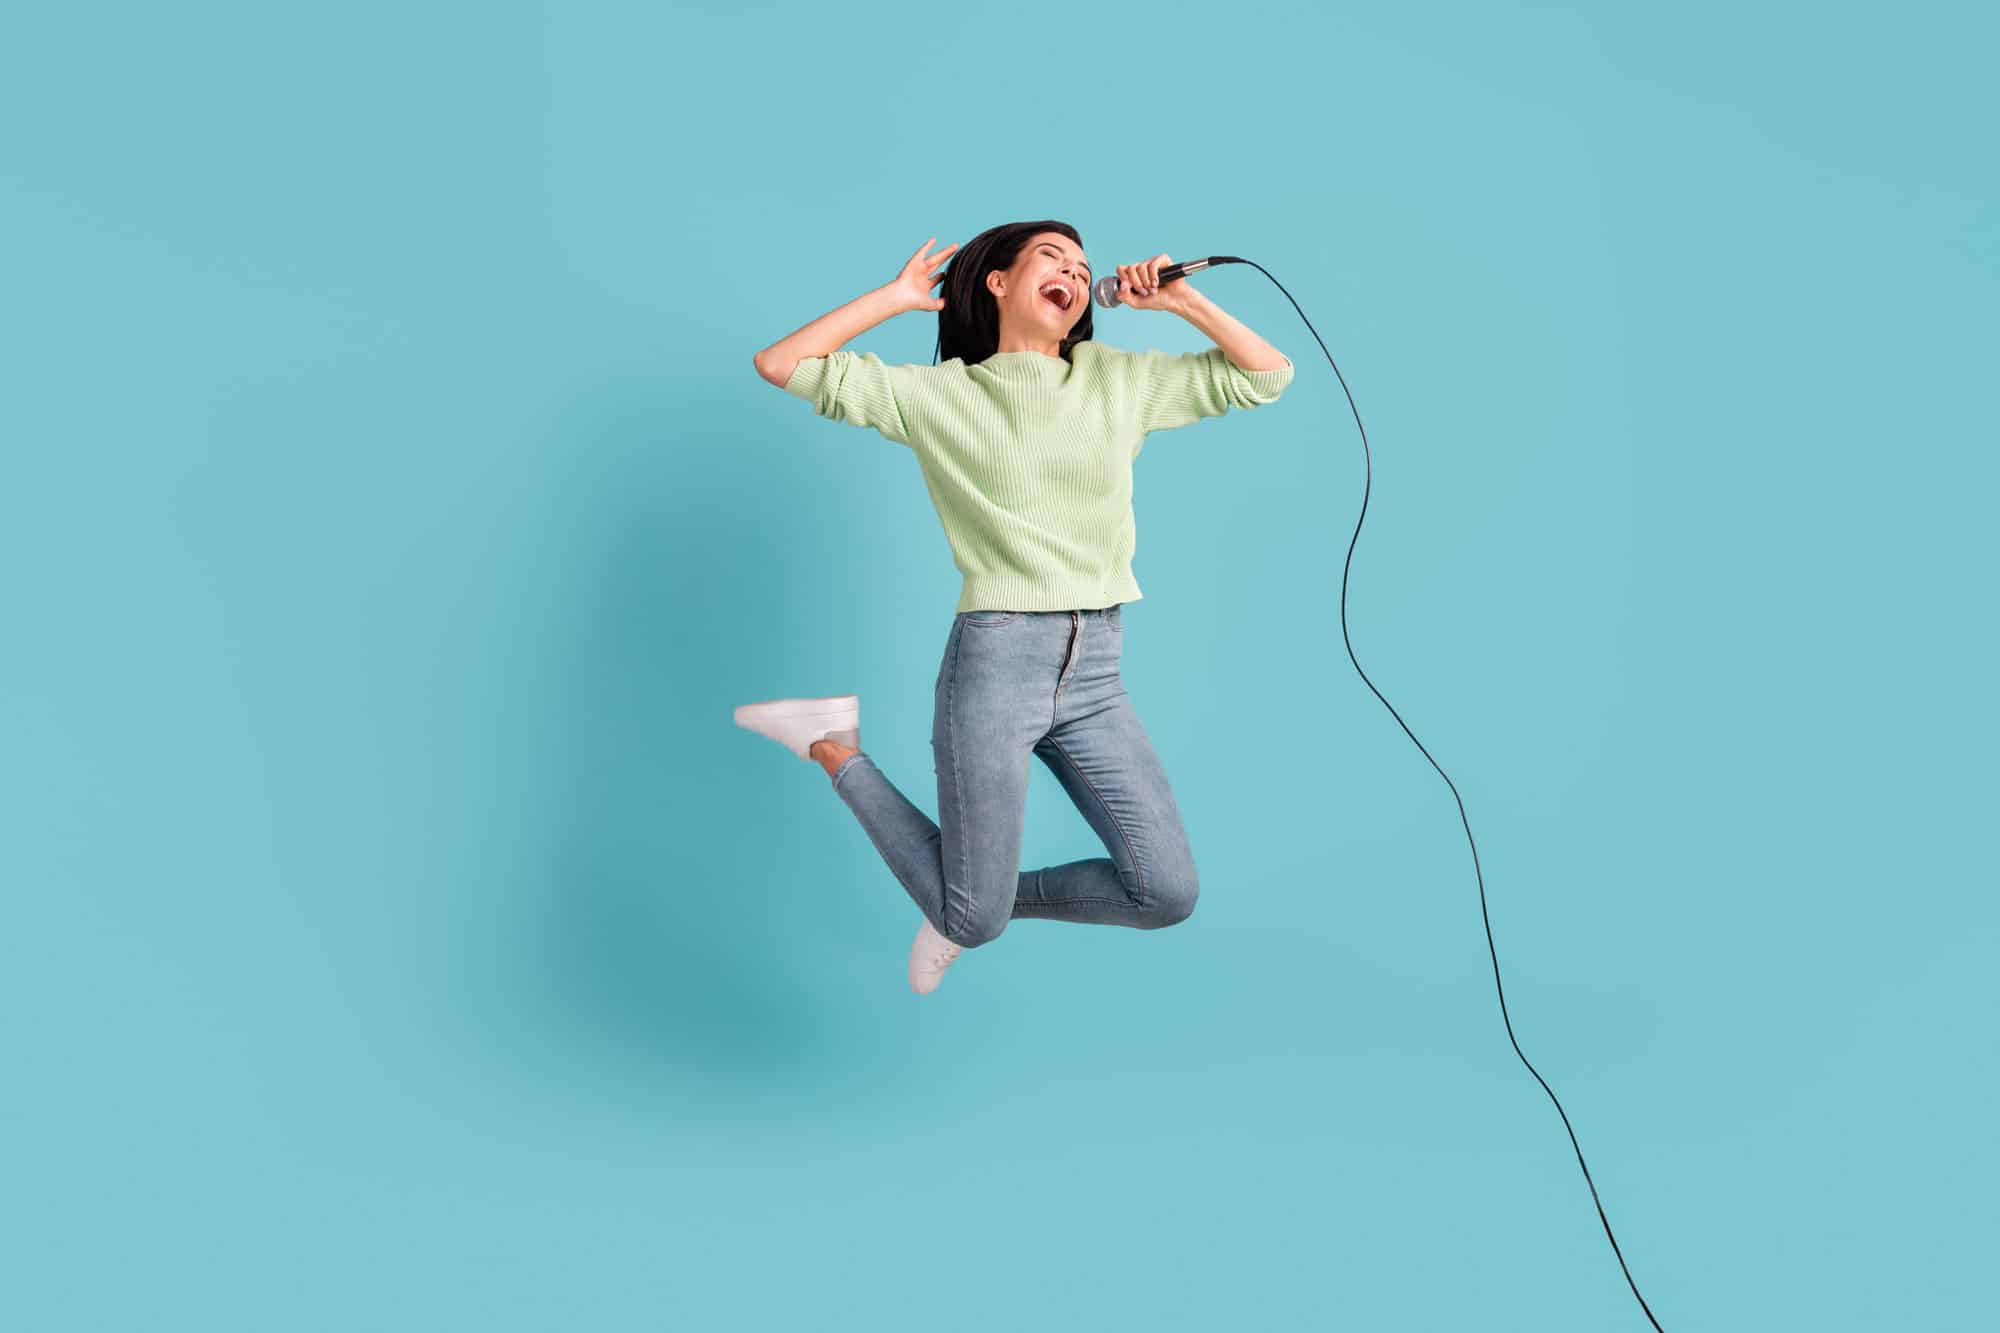 A woman with a microphone leaps into the air with delight - the image symbolises the successful singing of vocal riffs and runs